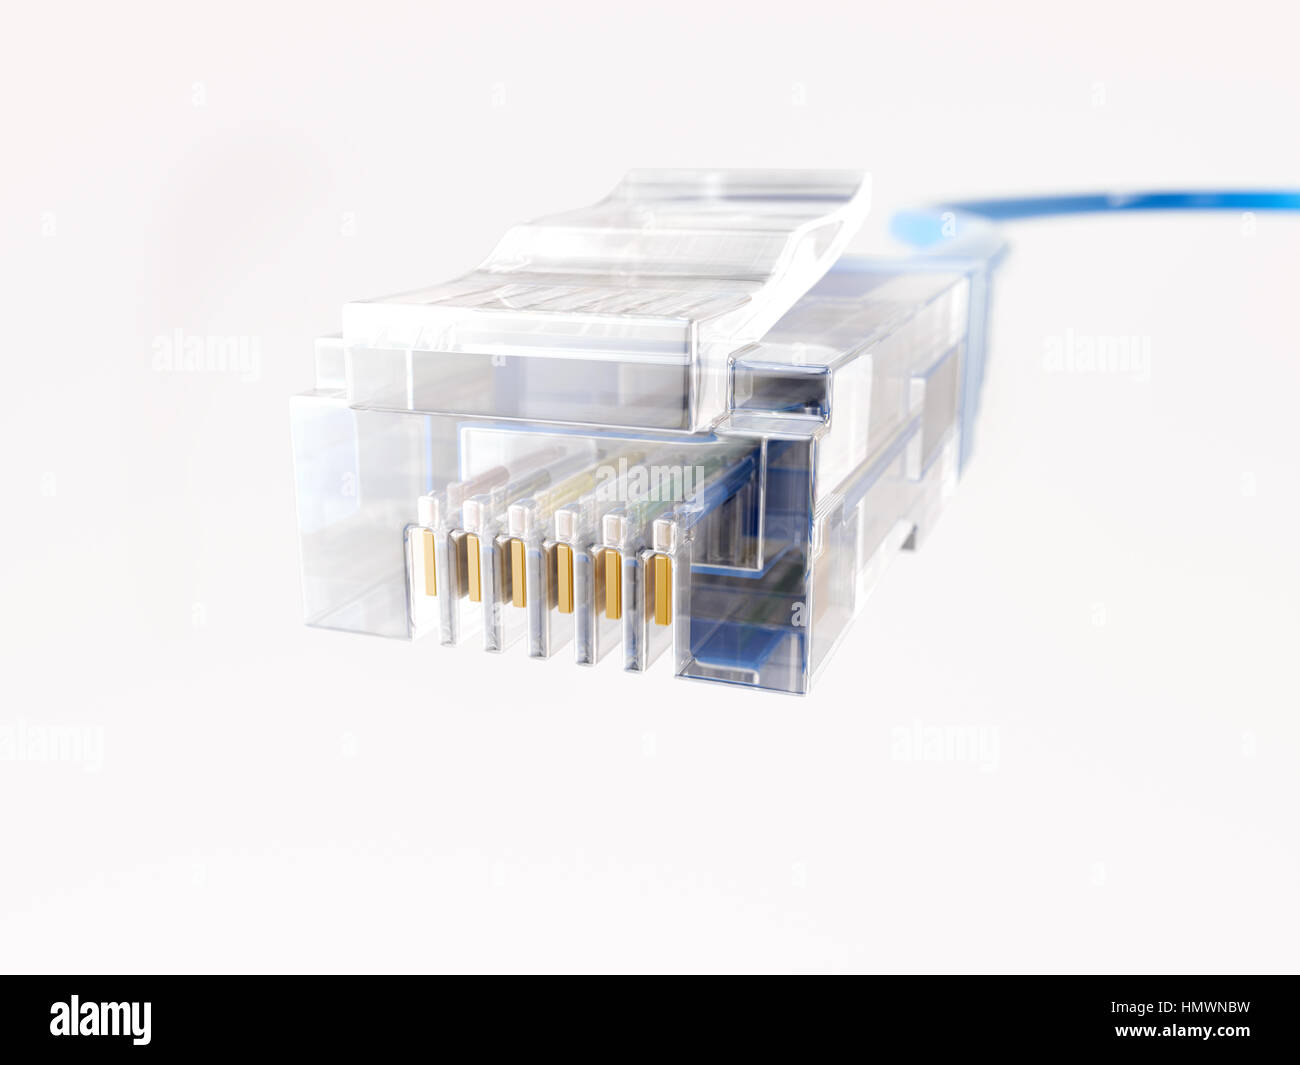 Ethernet cable close up - 3d Rendering Stock Photo